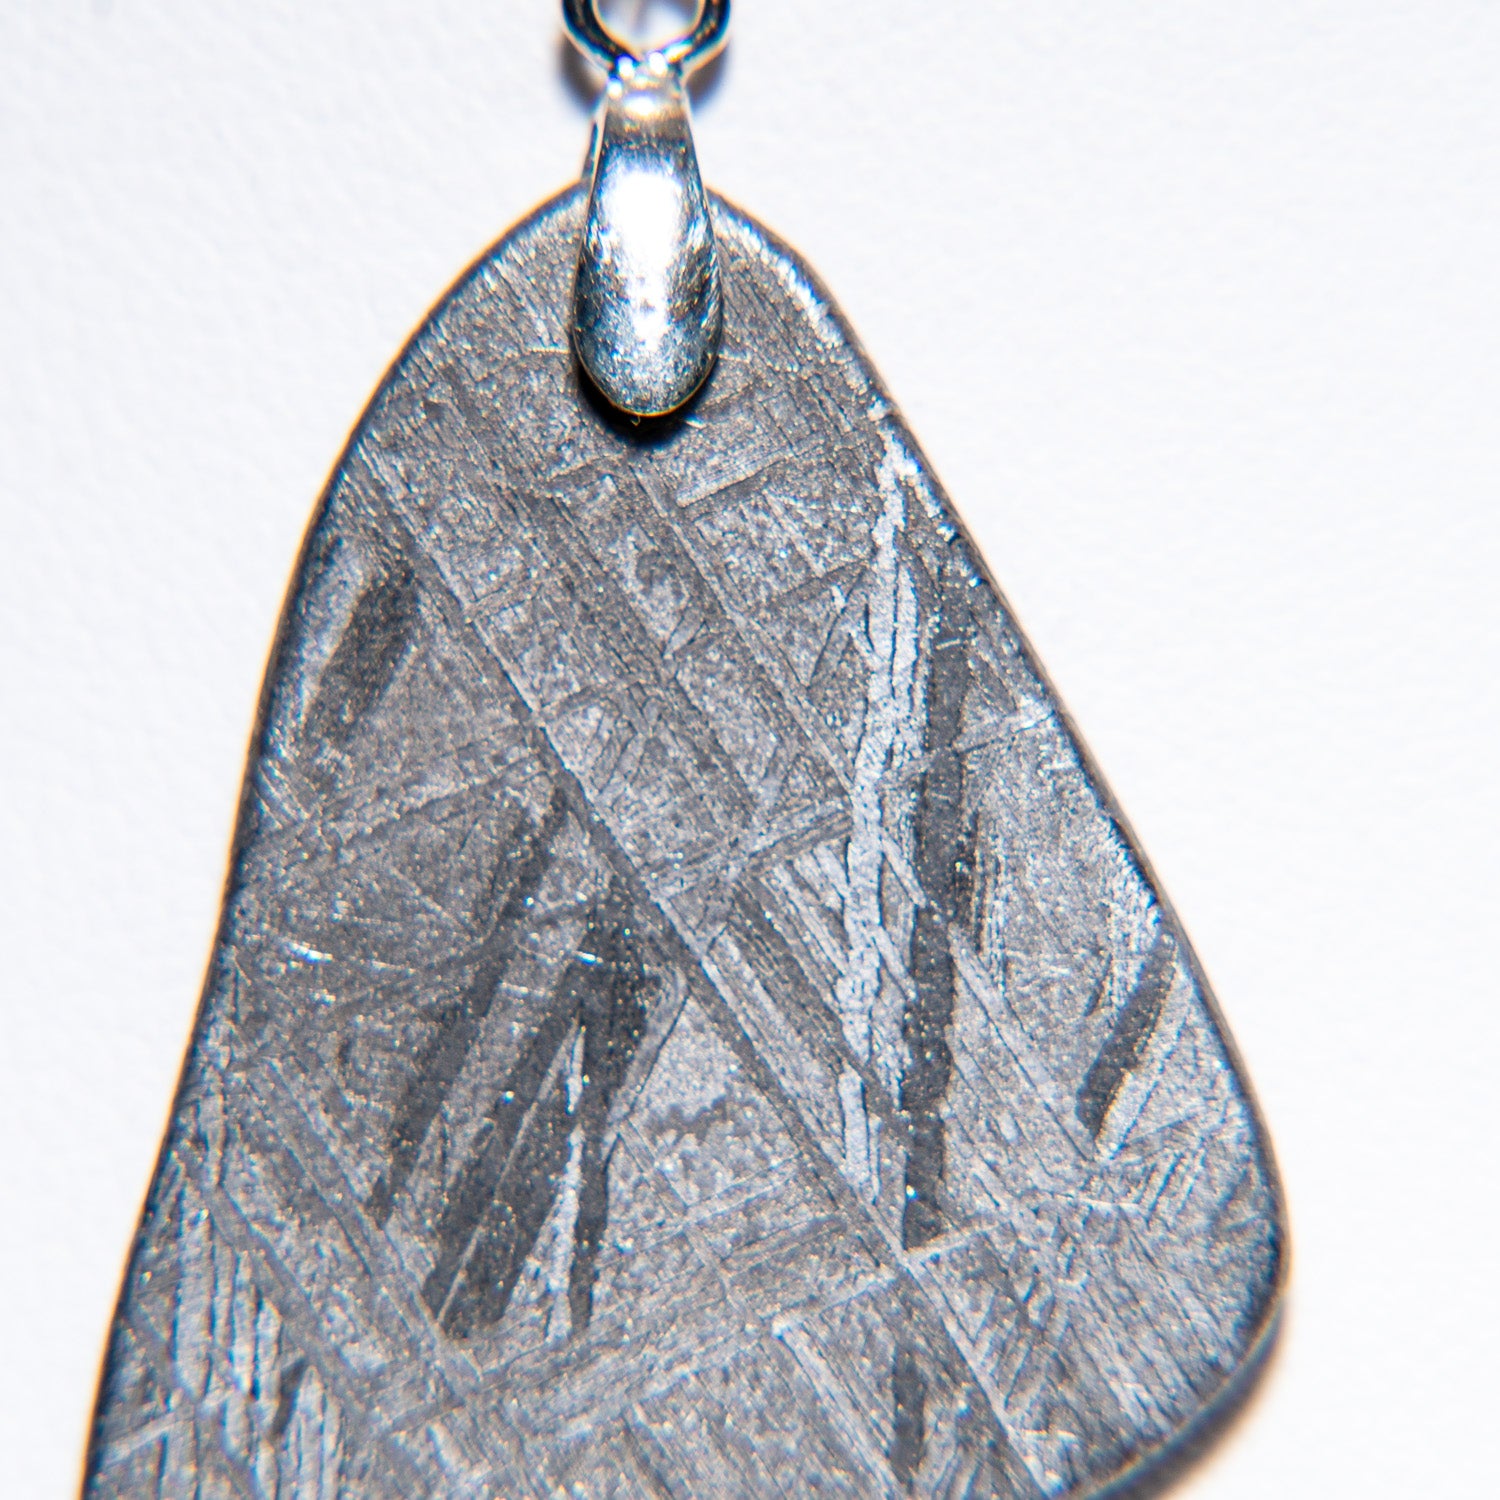 Polished Seymchan Meteorite pendant (11.9 grams) with 18" Sterling Silver Chain